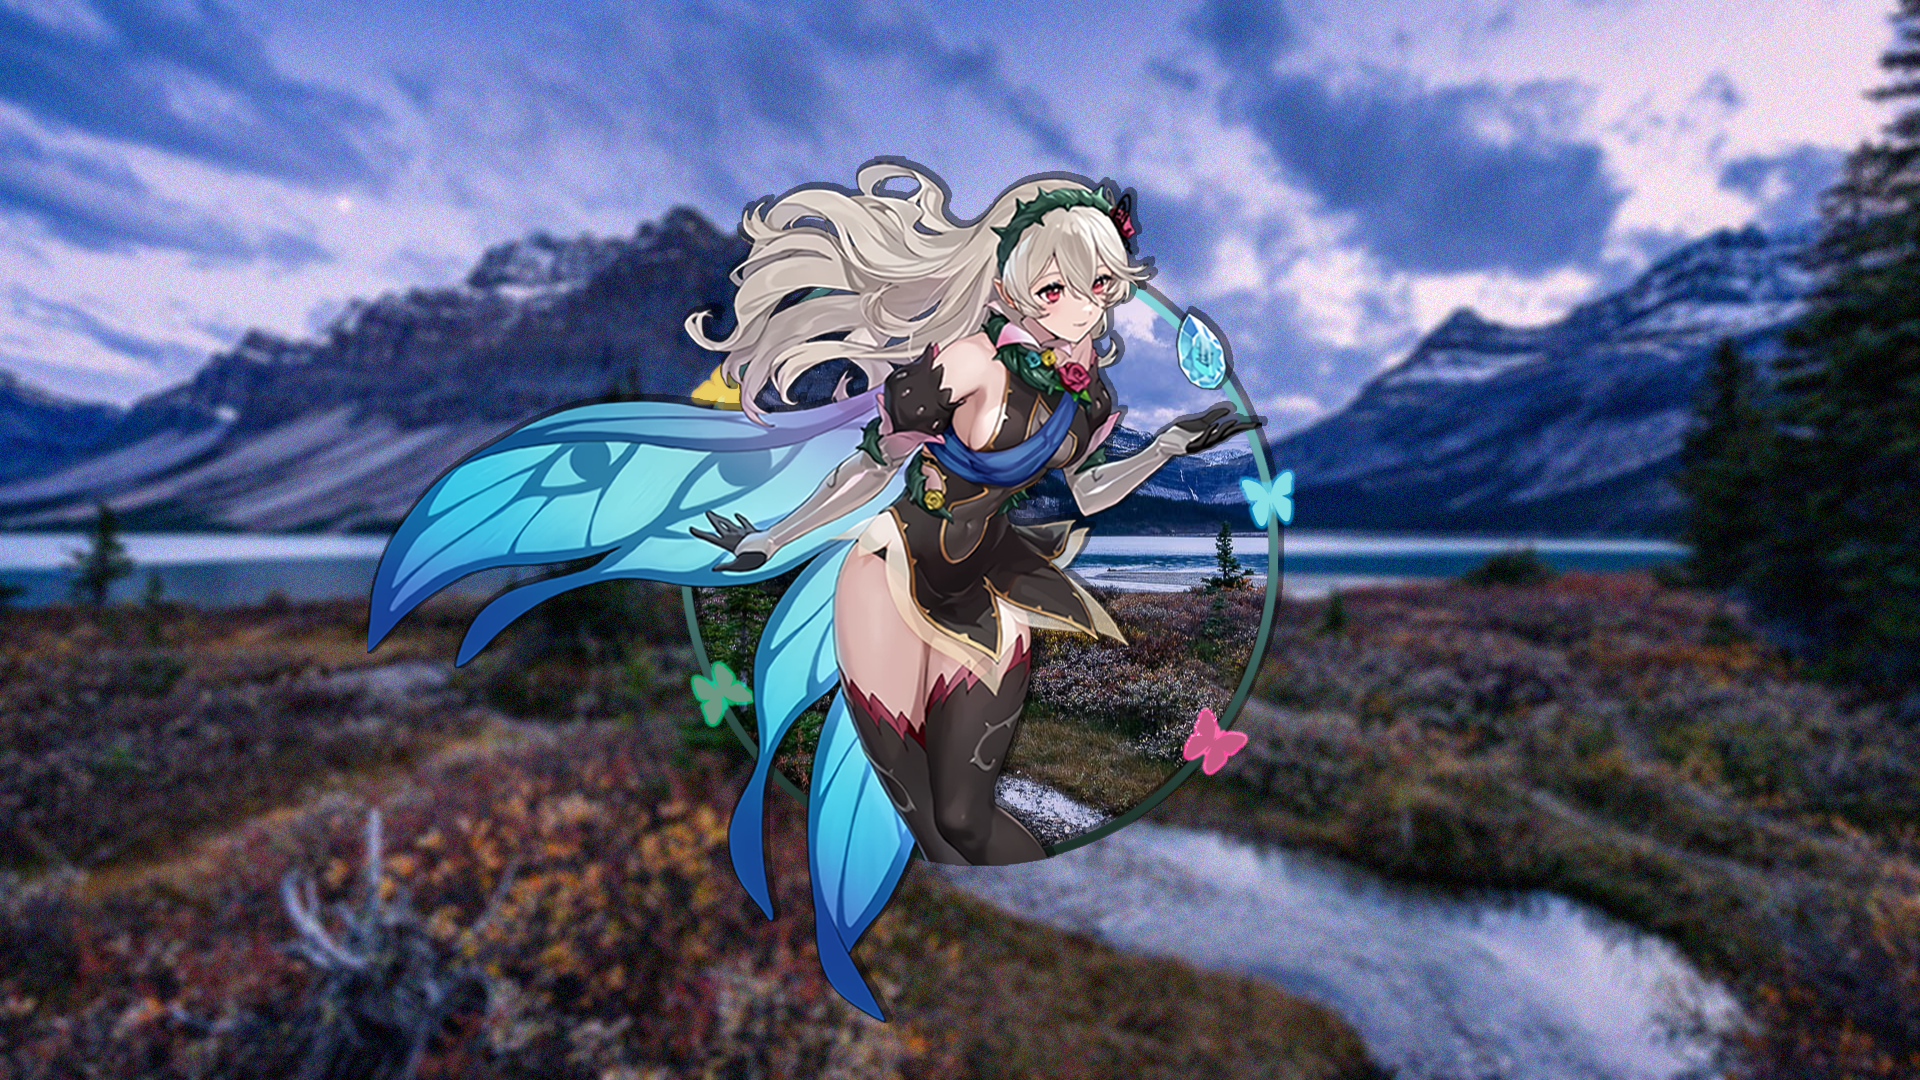 Anime 1920x1080 picture-in-picture anime girls Corrin Fire Emblem Fates lake butterfly